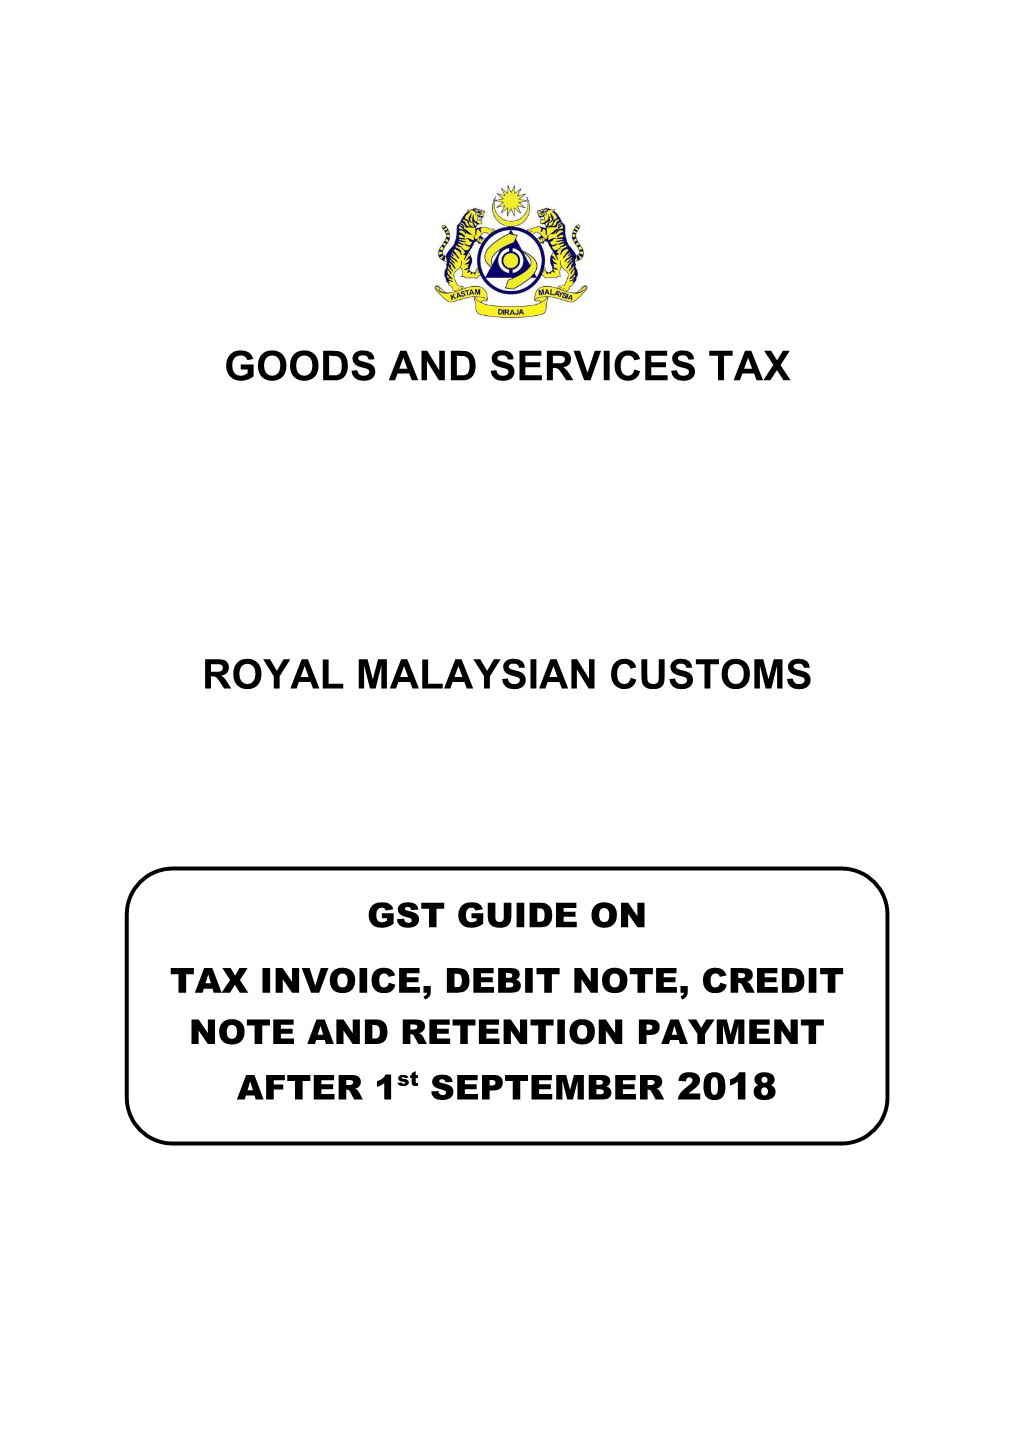 GST Guide on Tax Invoice, Debit Note, Credit Note